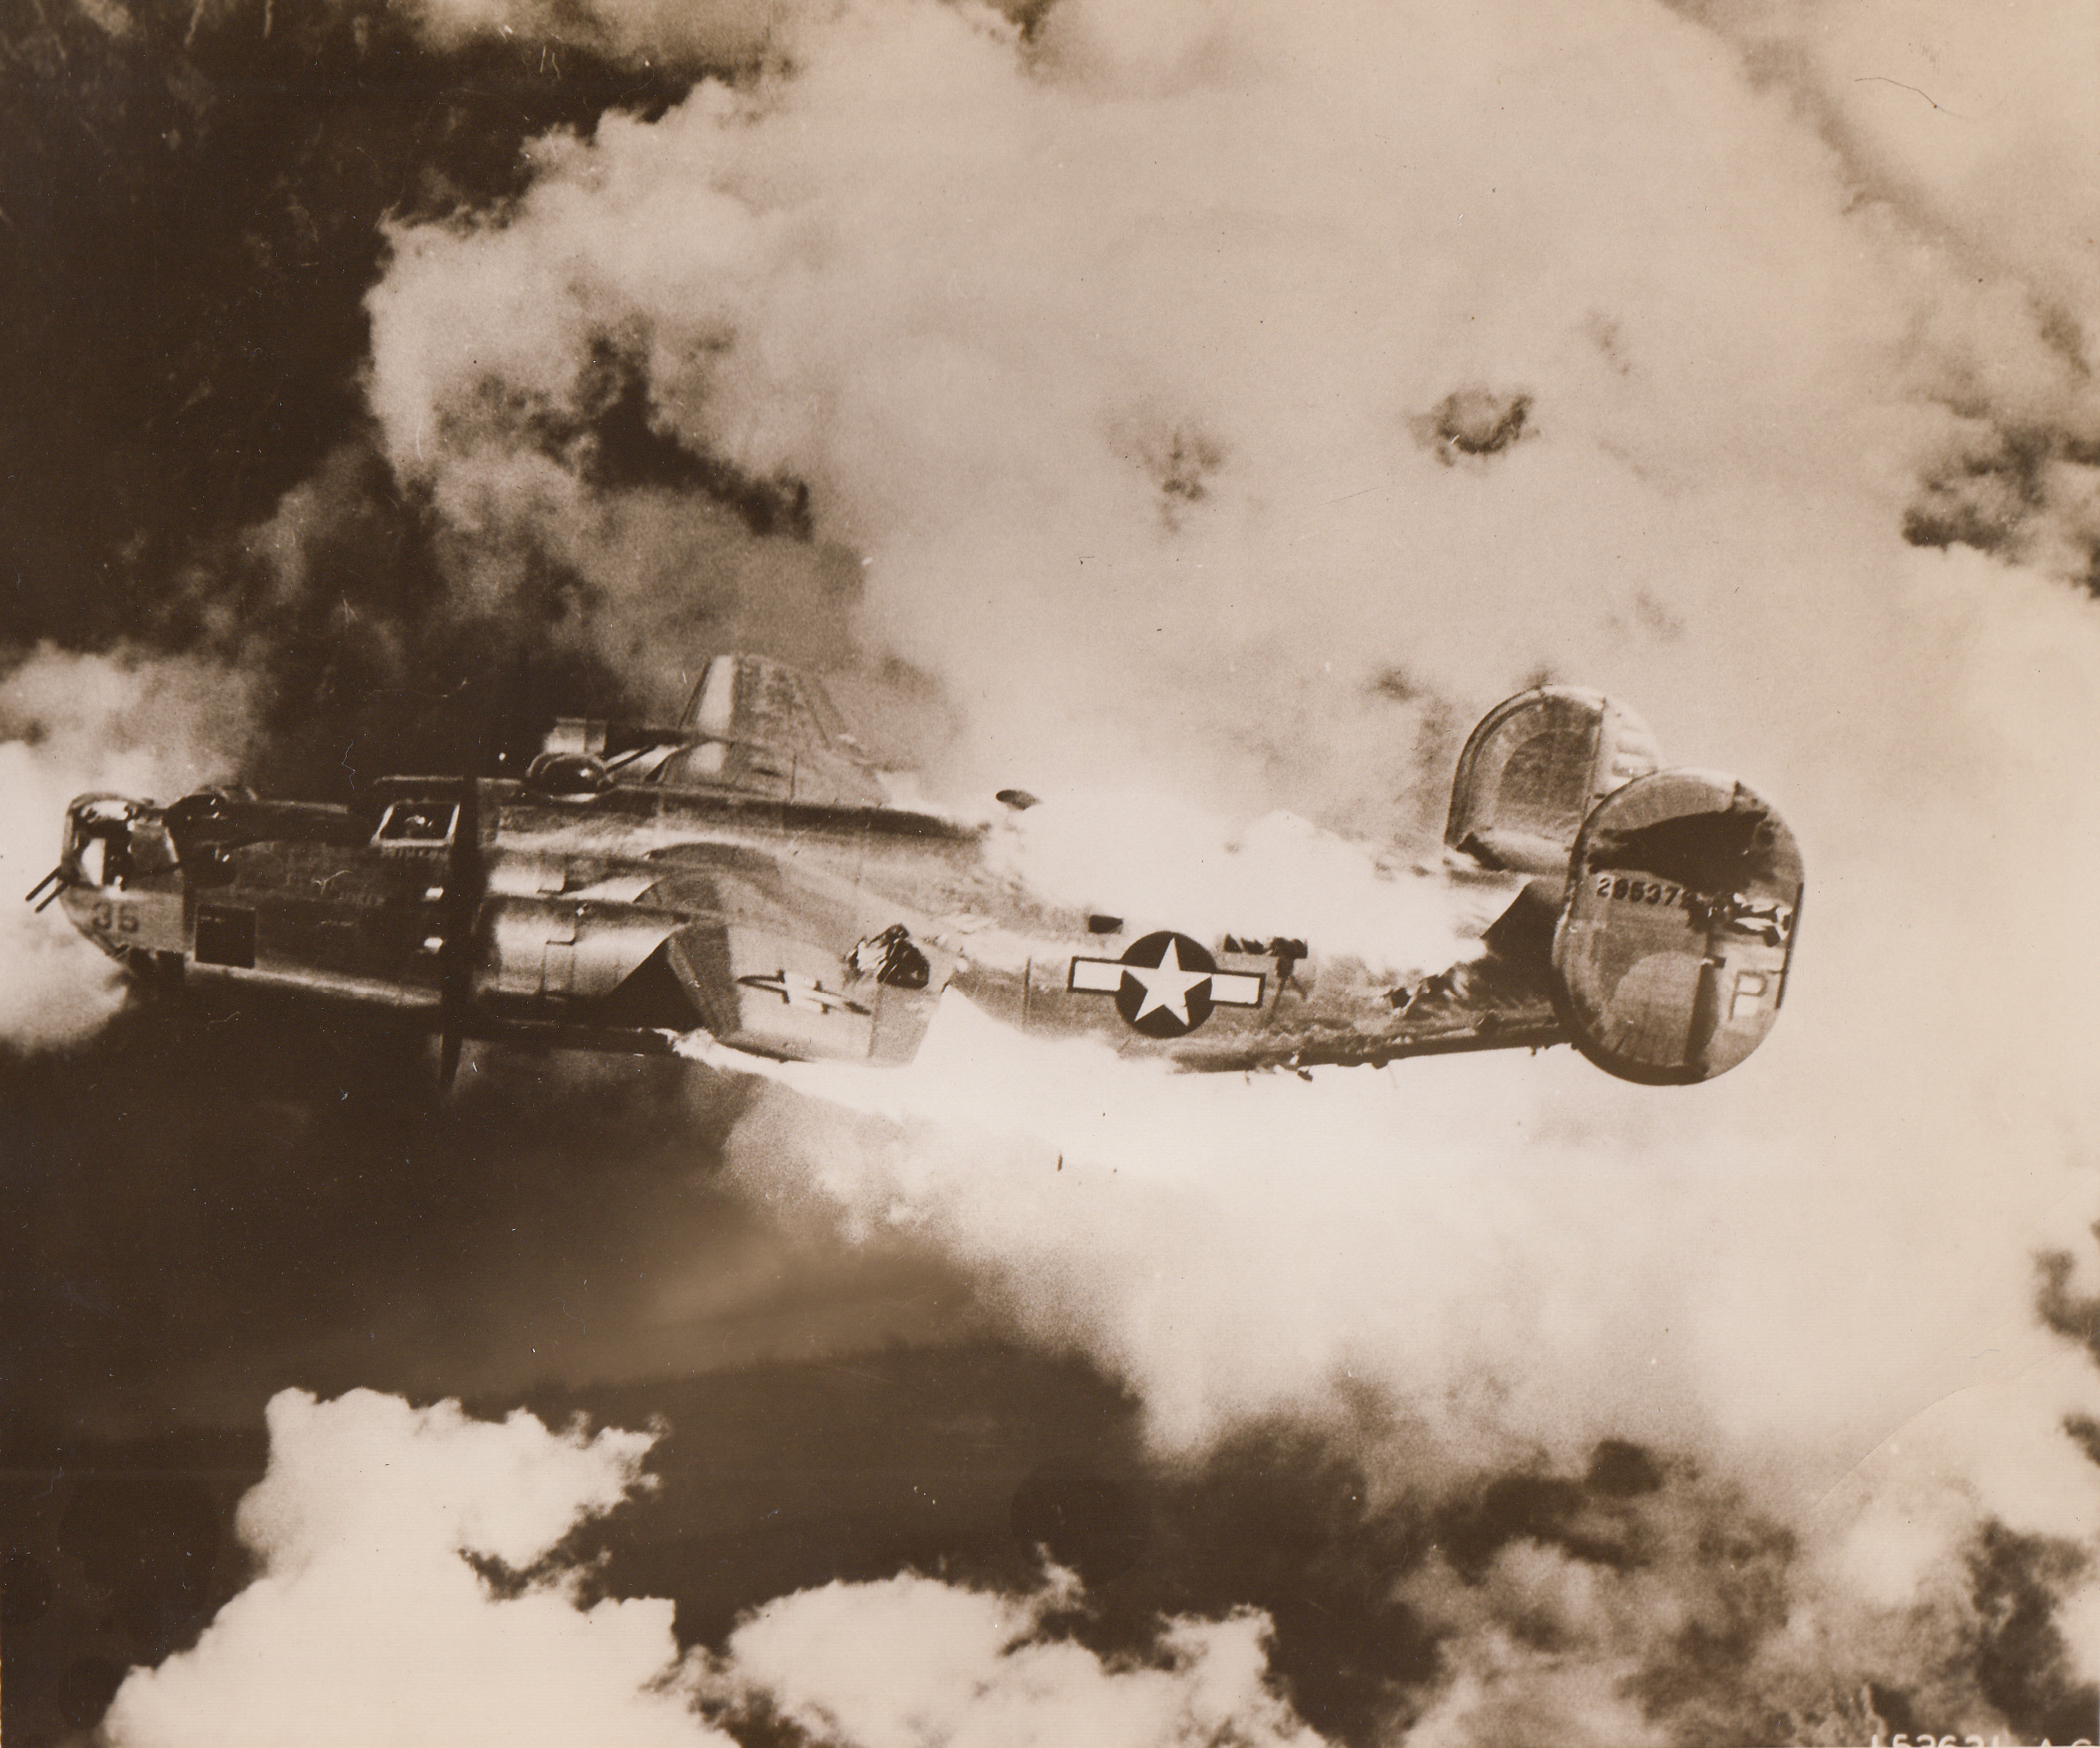 A Liberator on its Last Mission, 9/8/1944. Flames roar from the fuselage of a mortally wounded Liberator from Austria. Seconds later the big ship plummeted to earth. Photographer said the pilot was still in the cockpit, gunner in the tail.;